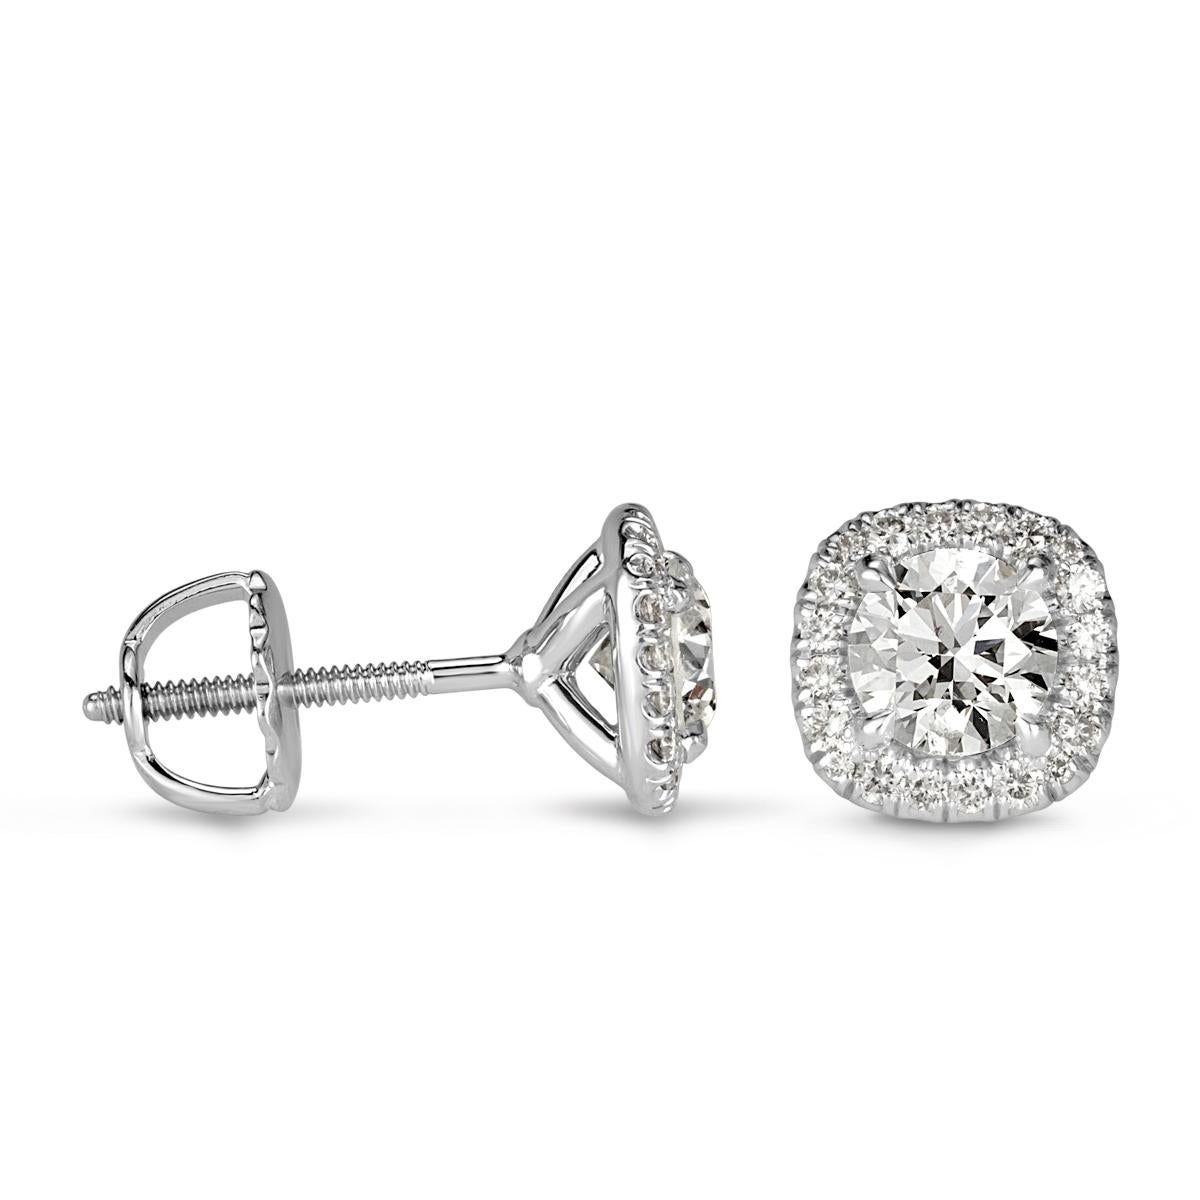 Custom created in 18k white gold, this stunning pair of diamond stud earrings showcases two round brilliant cut center diamonds each surrounded by a shimmering cushion shaped halo. They total 1.00ct in weight and are graded at E-F, VS2-SI2.
